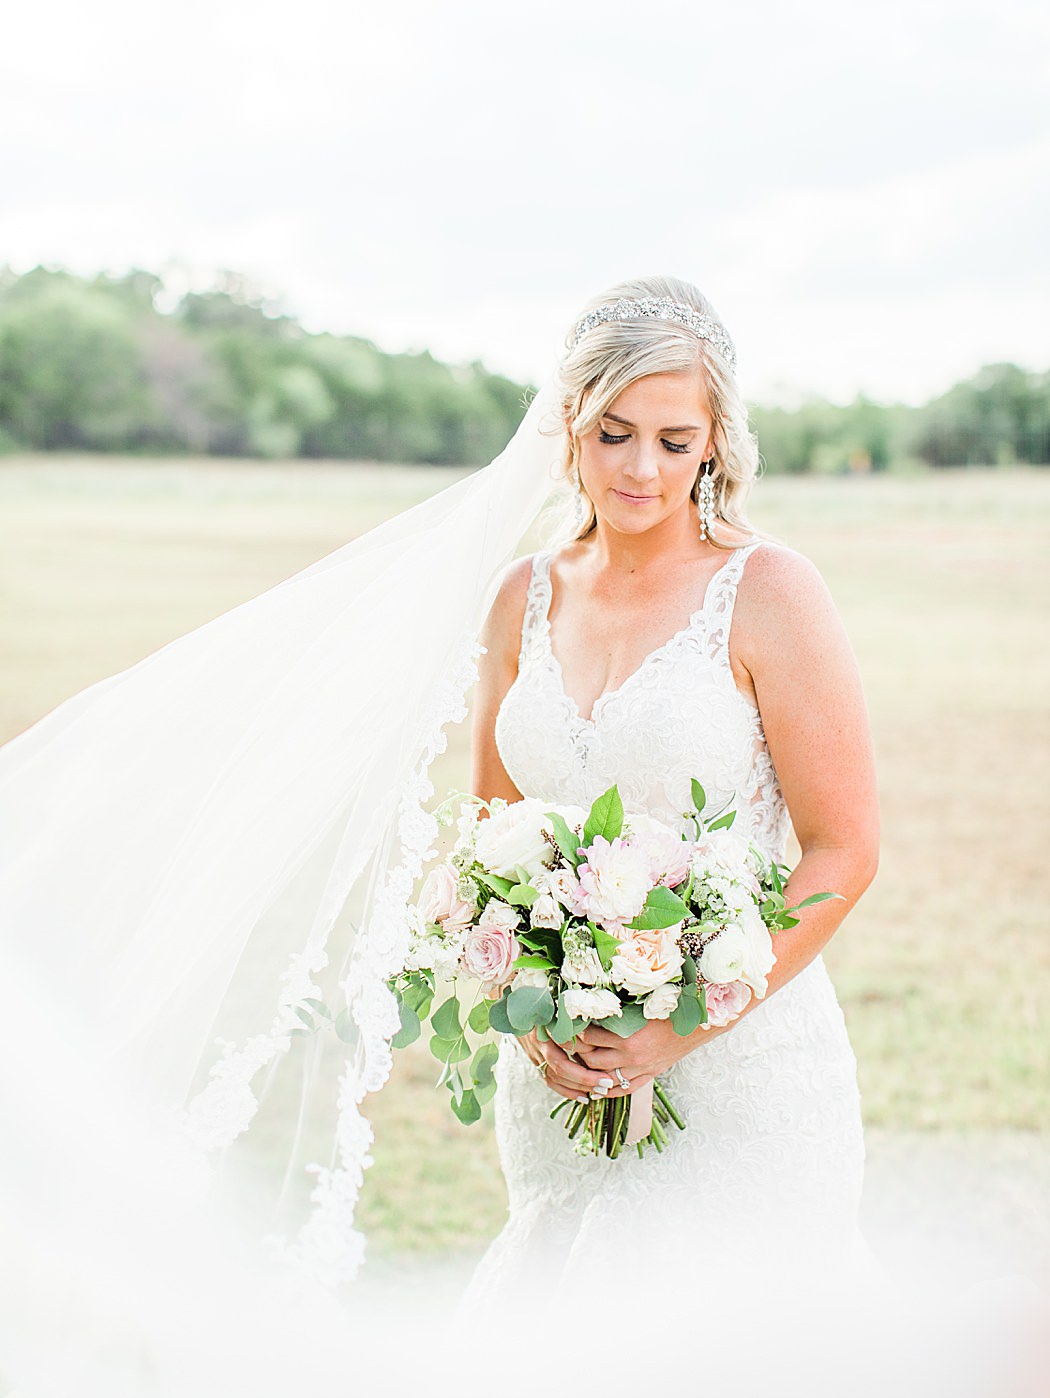 Summer Wedding at The Lodge at Country Inn Cottages in Fredericksburg Texas by Allison Jeffers Photography 0045